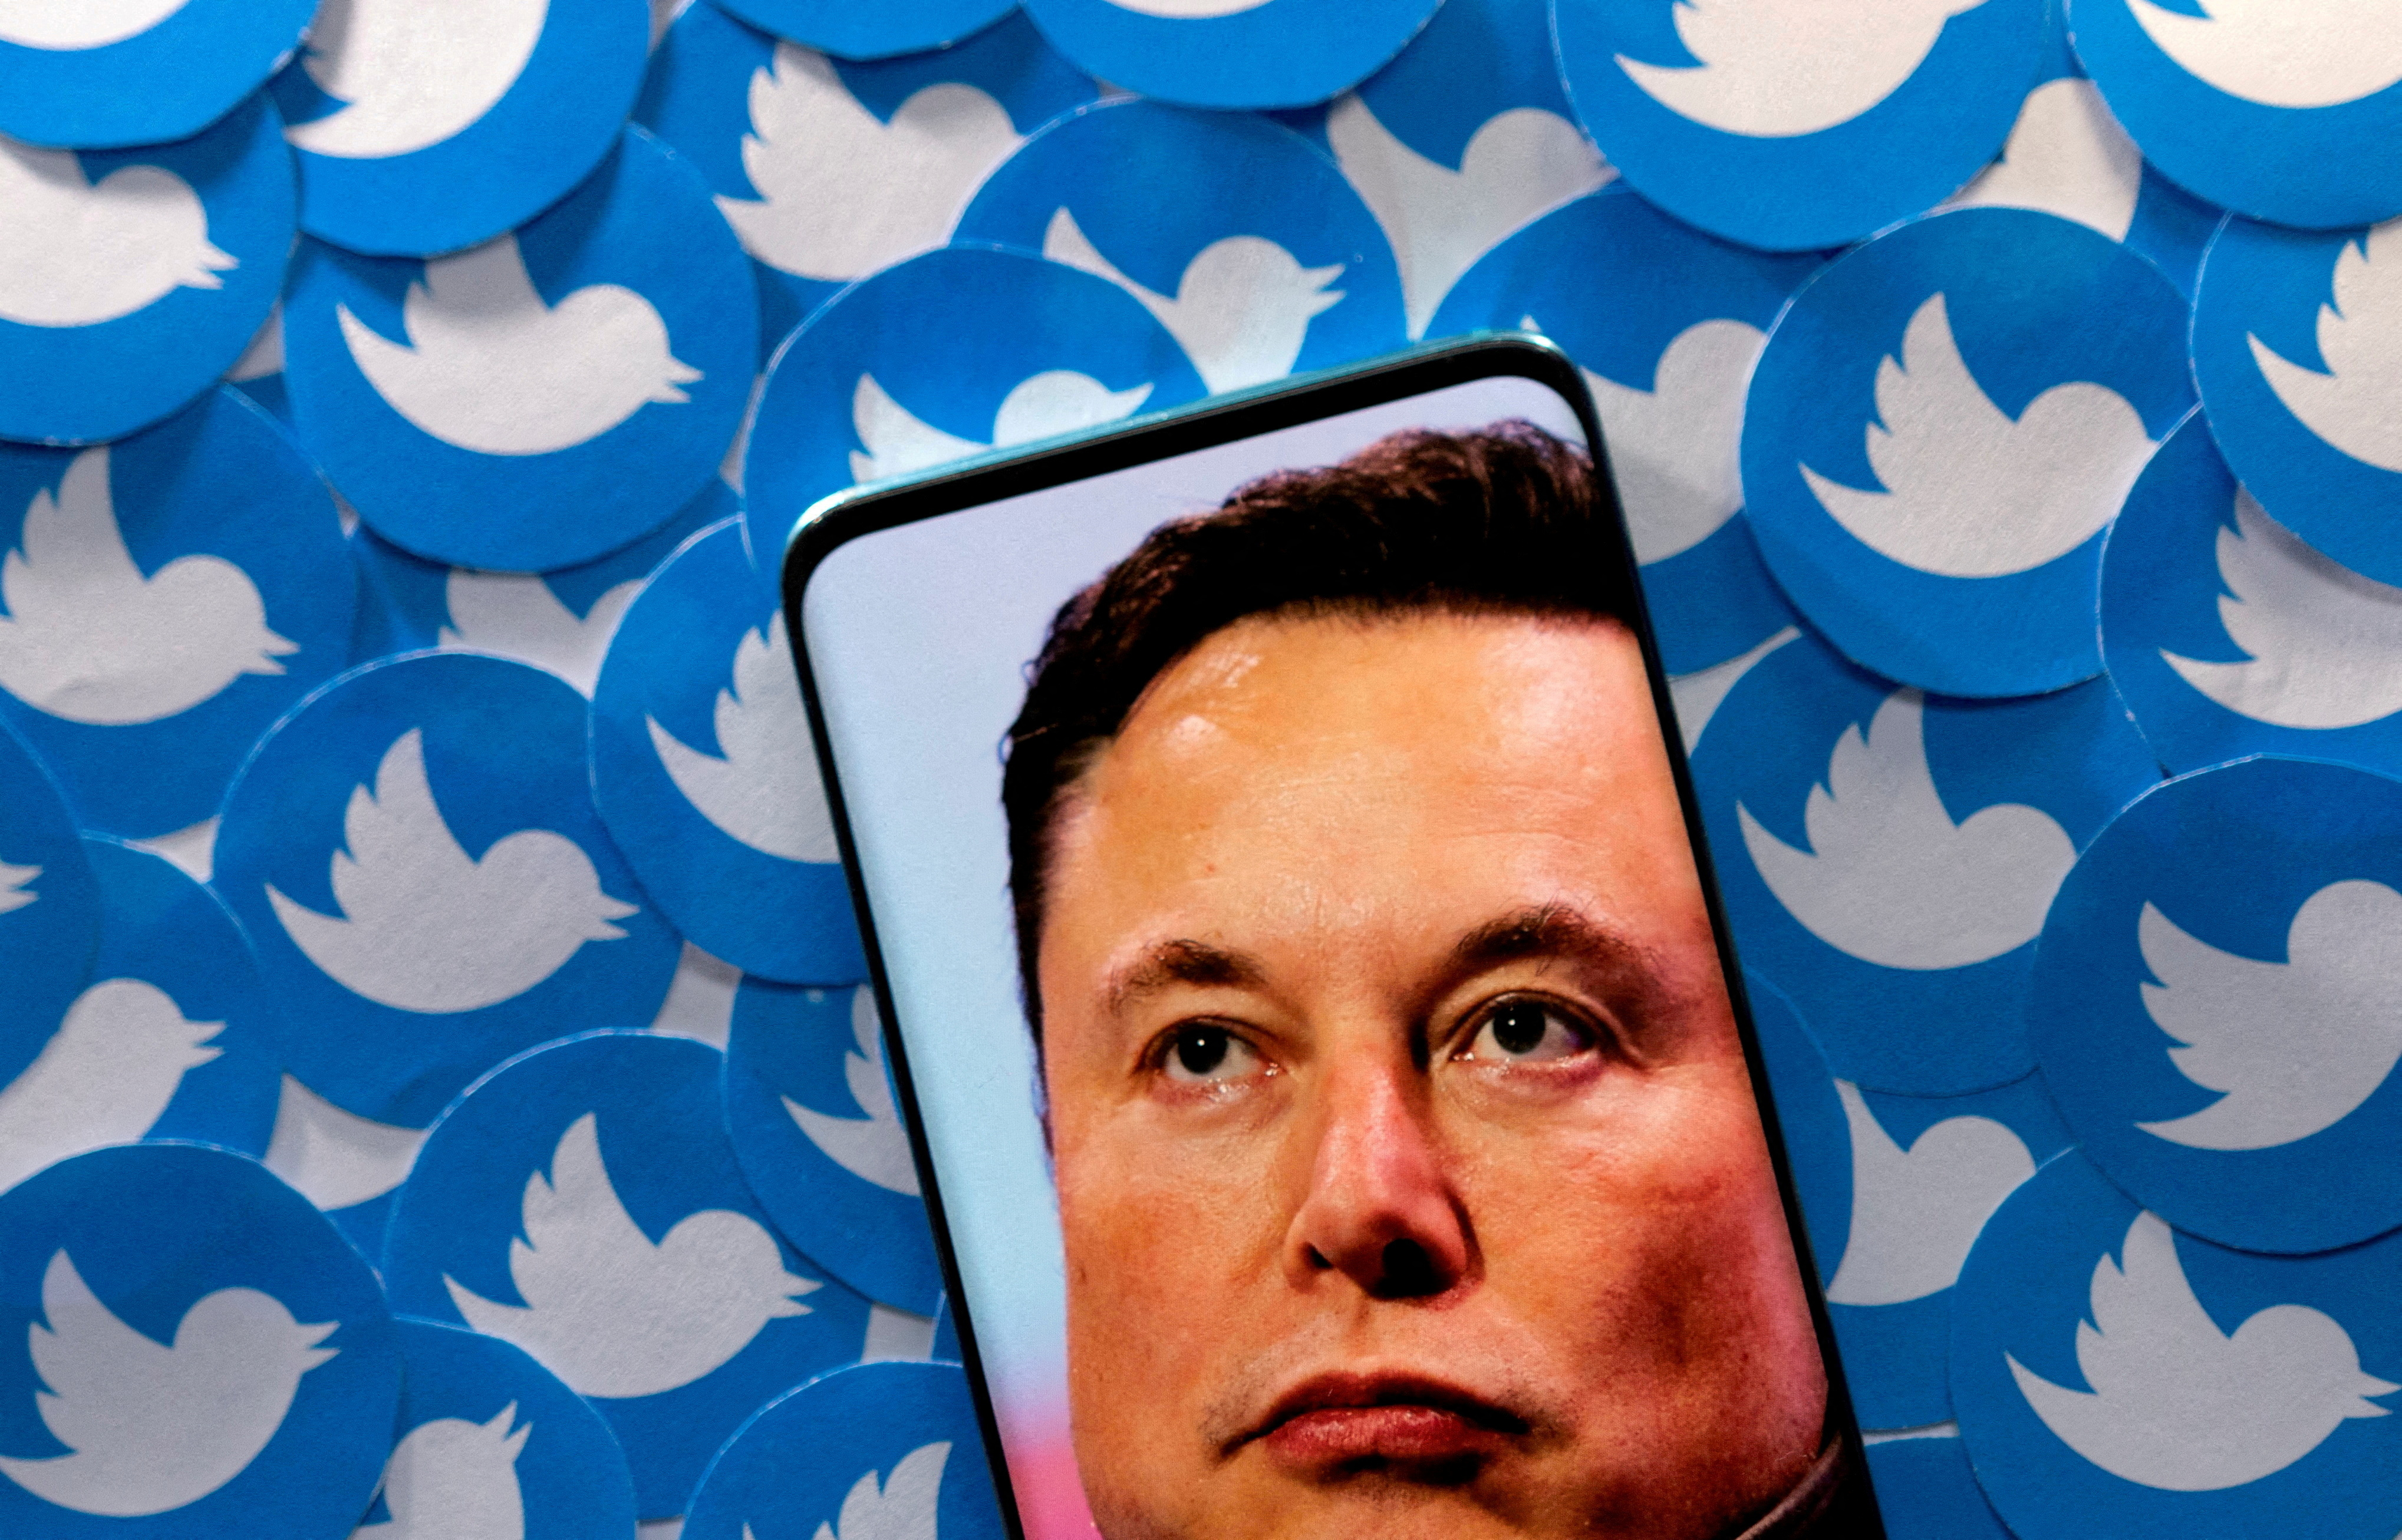 An illustration showing an image of Elon Musk and the famous Twitter logo